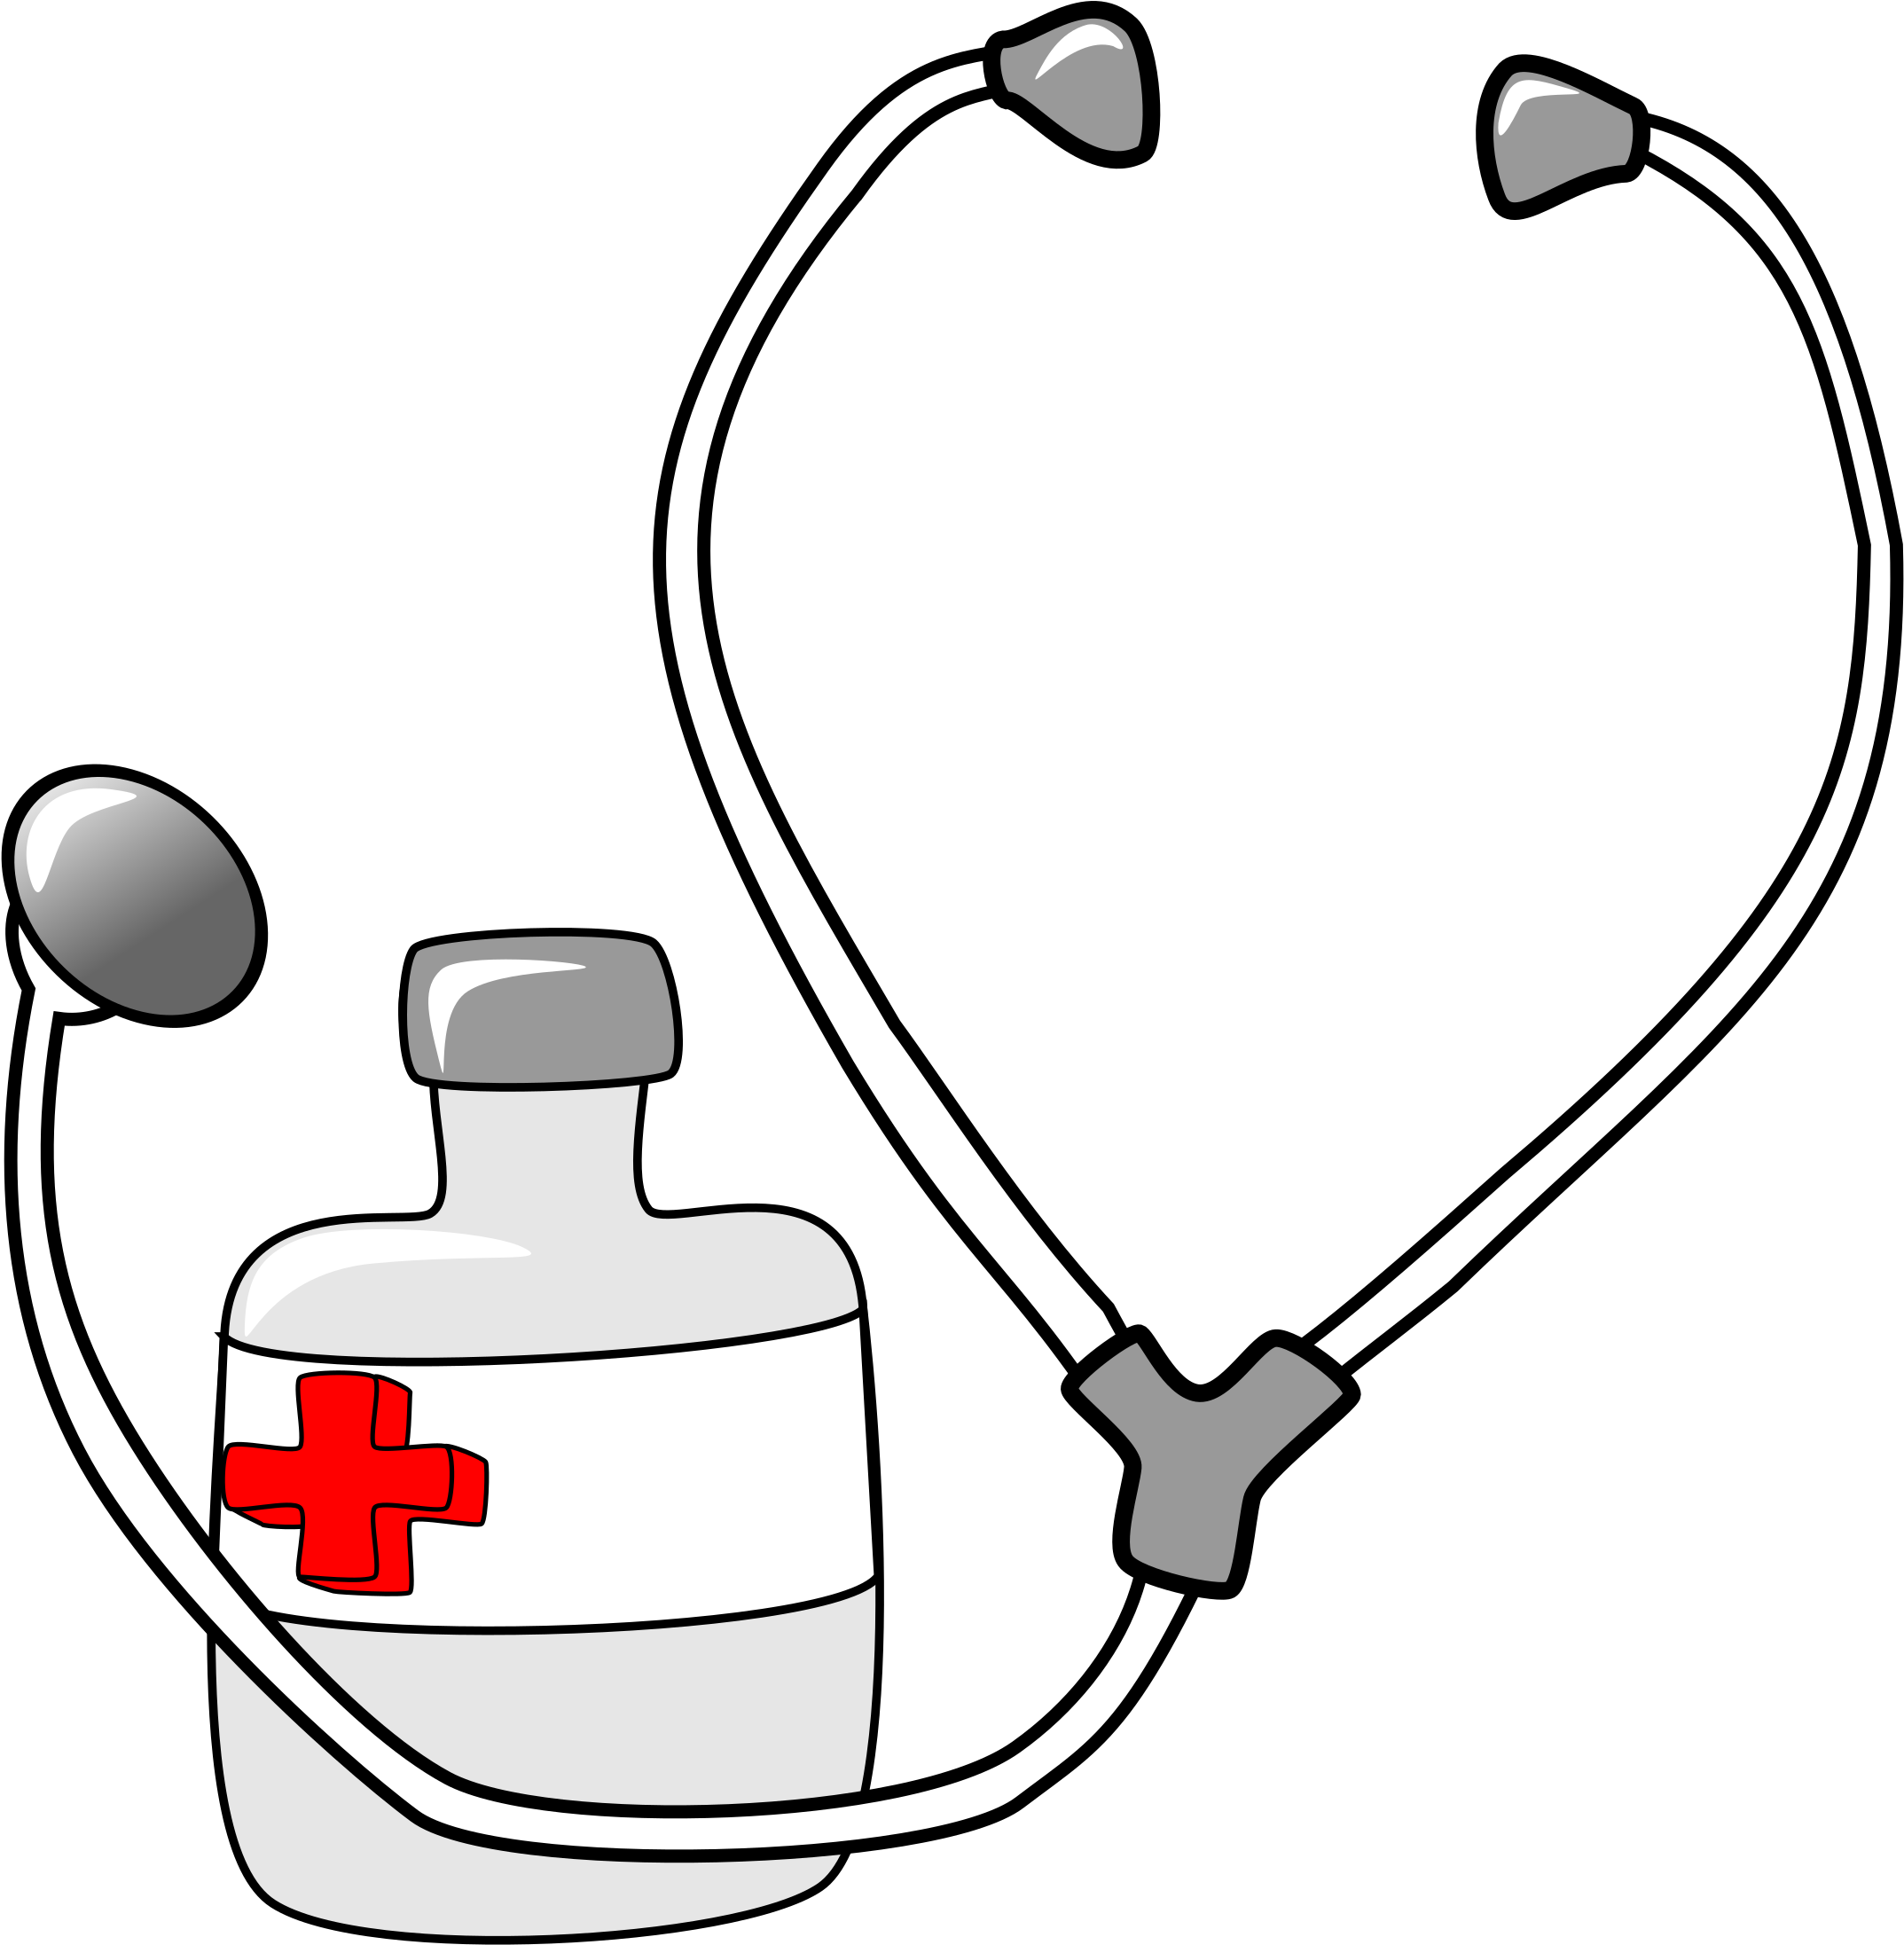 Medicine And A Stethoscope - Stethoscope Clipart (2400x2400)